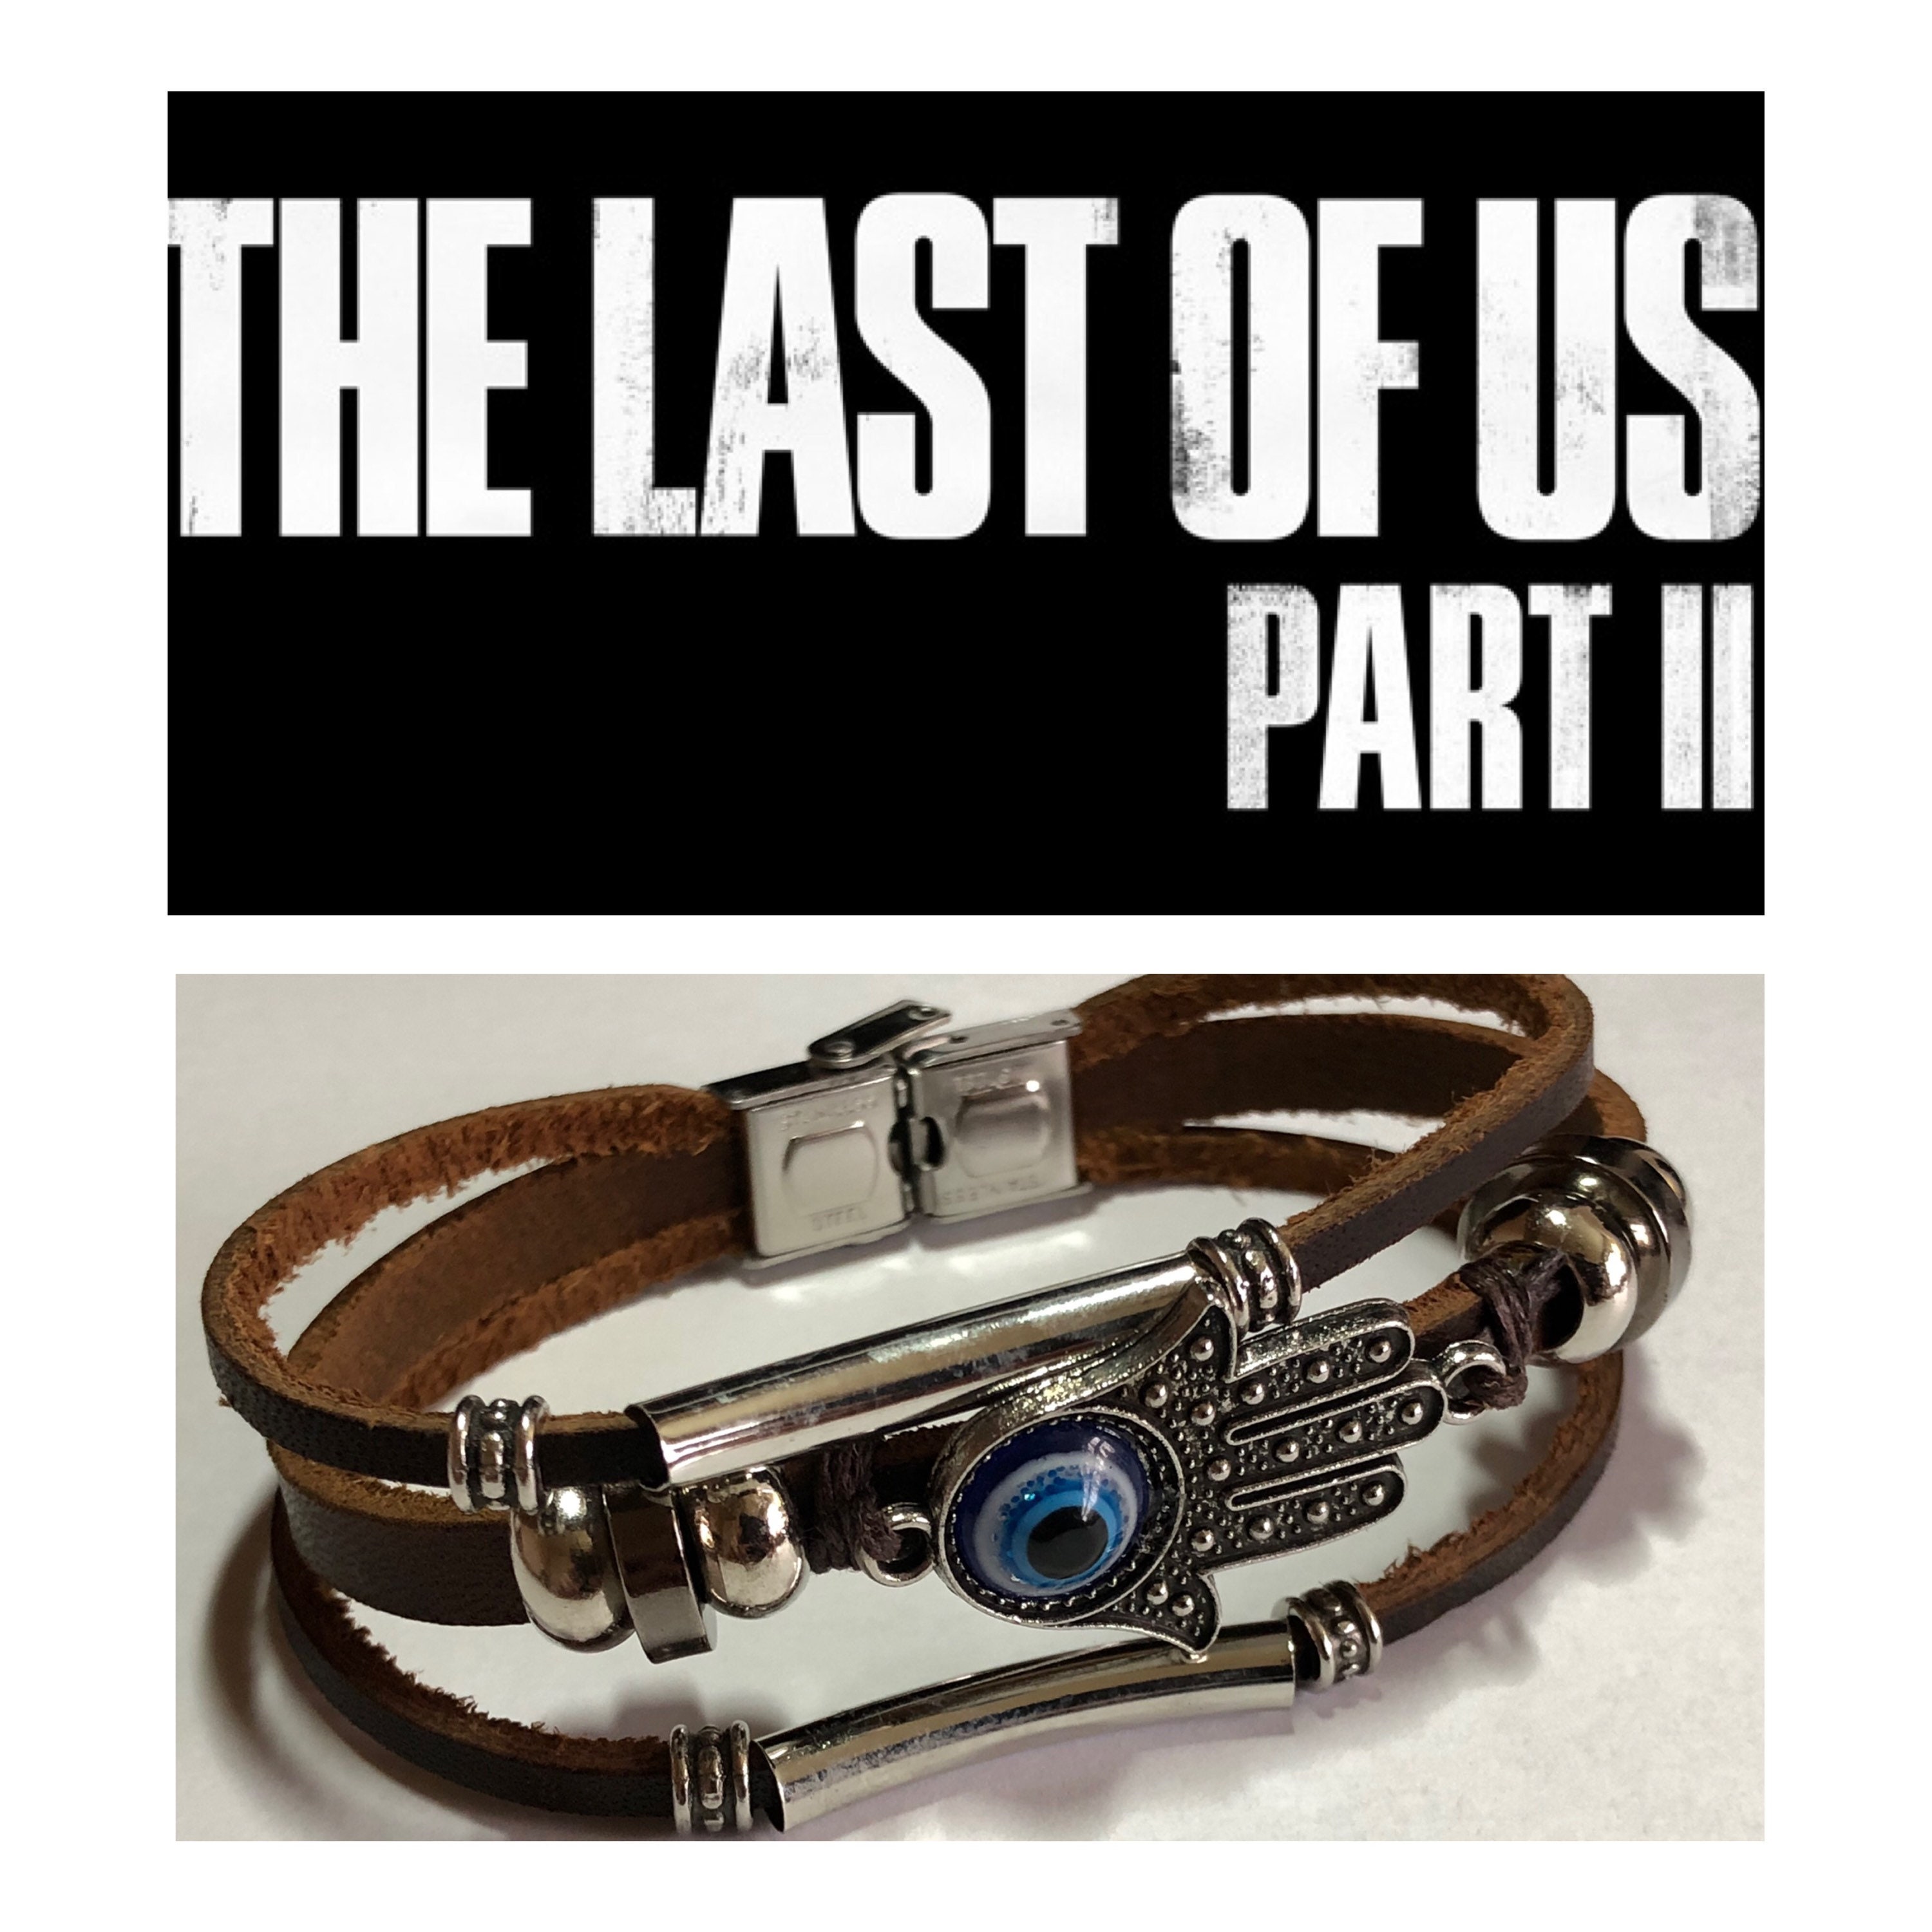 The Last of Us Part II Ellie Edition Restock, New Key Art, and